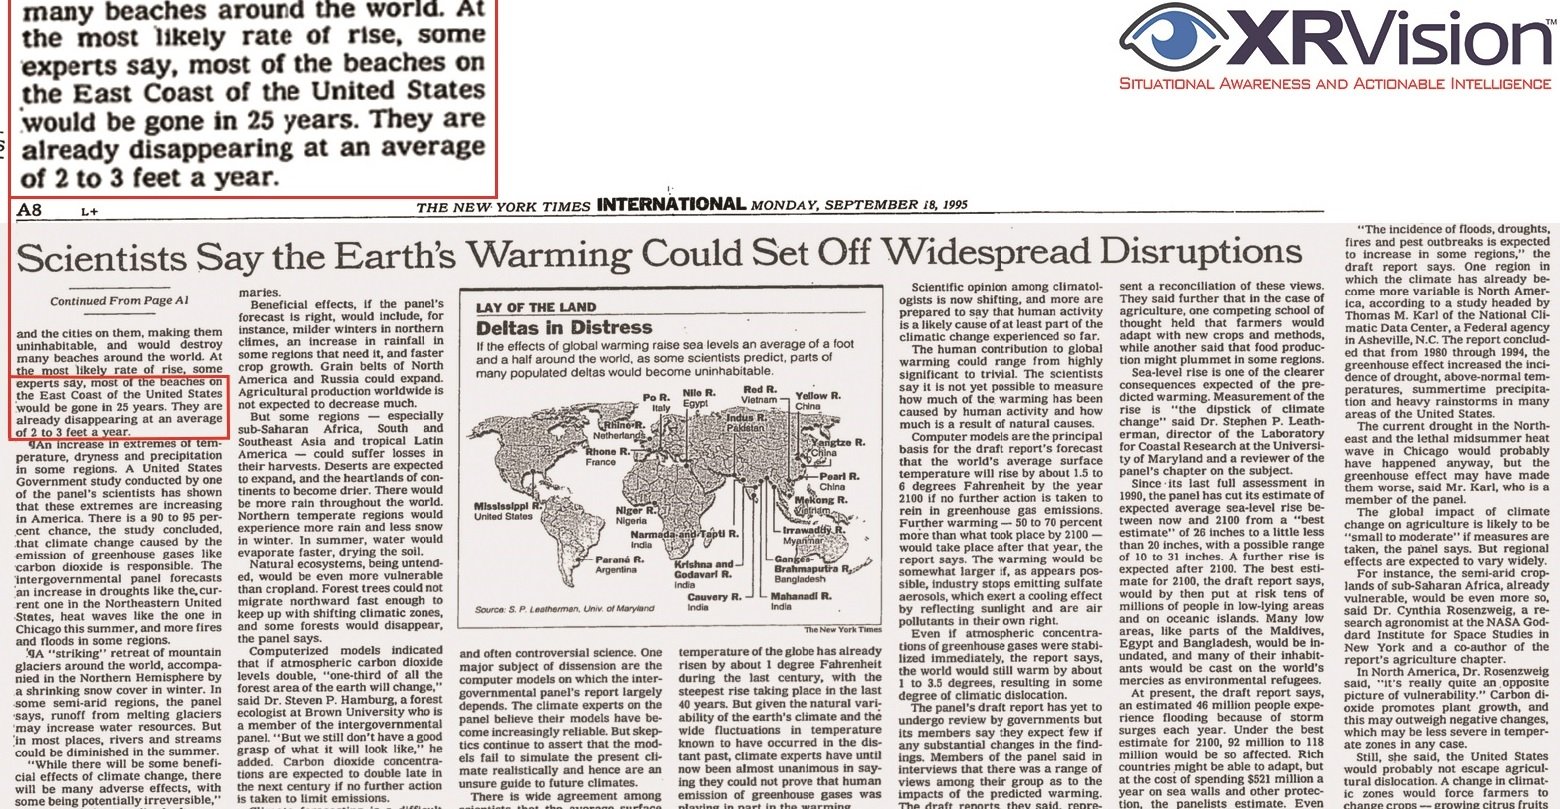 NYT-1995-Beaches-are-gone-in-25-Years3.jpg